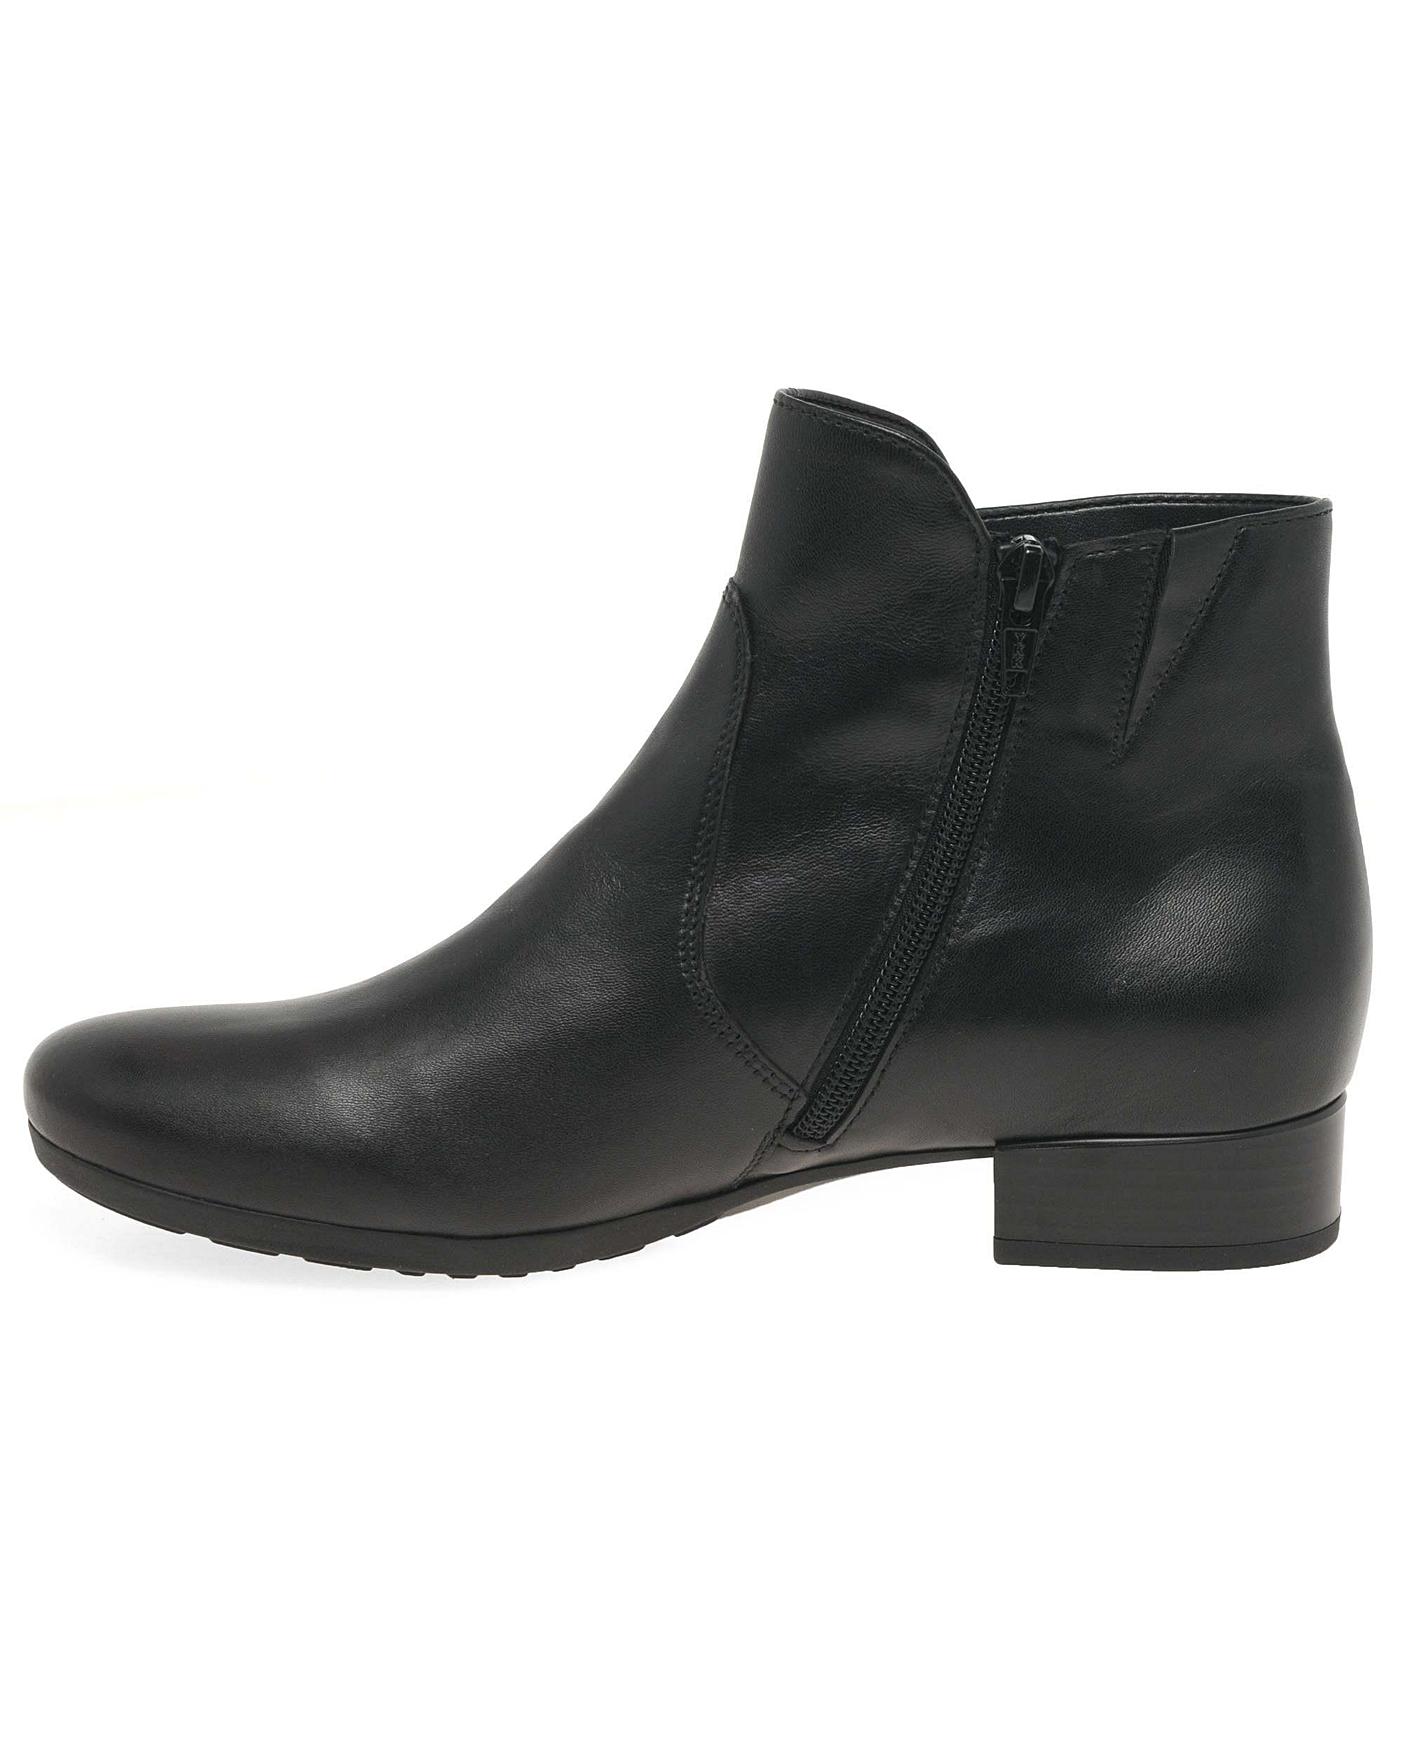 Gabor Bolan Wide Fit Ankle Boots | J D Williams